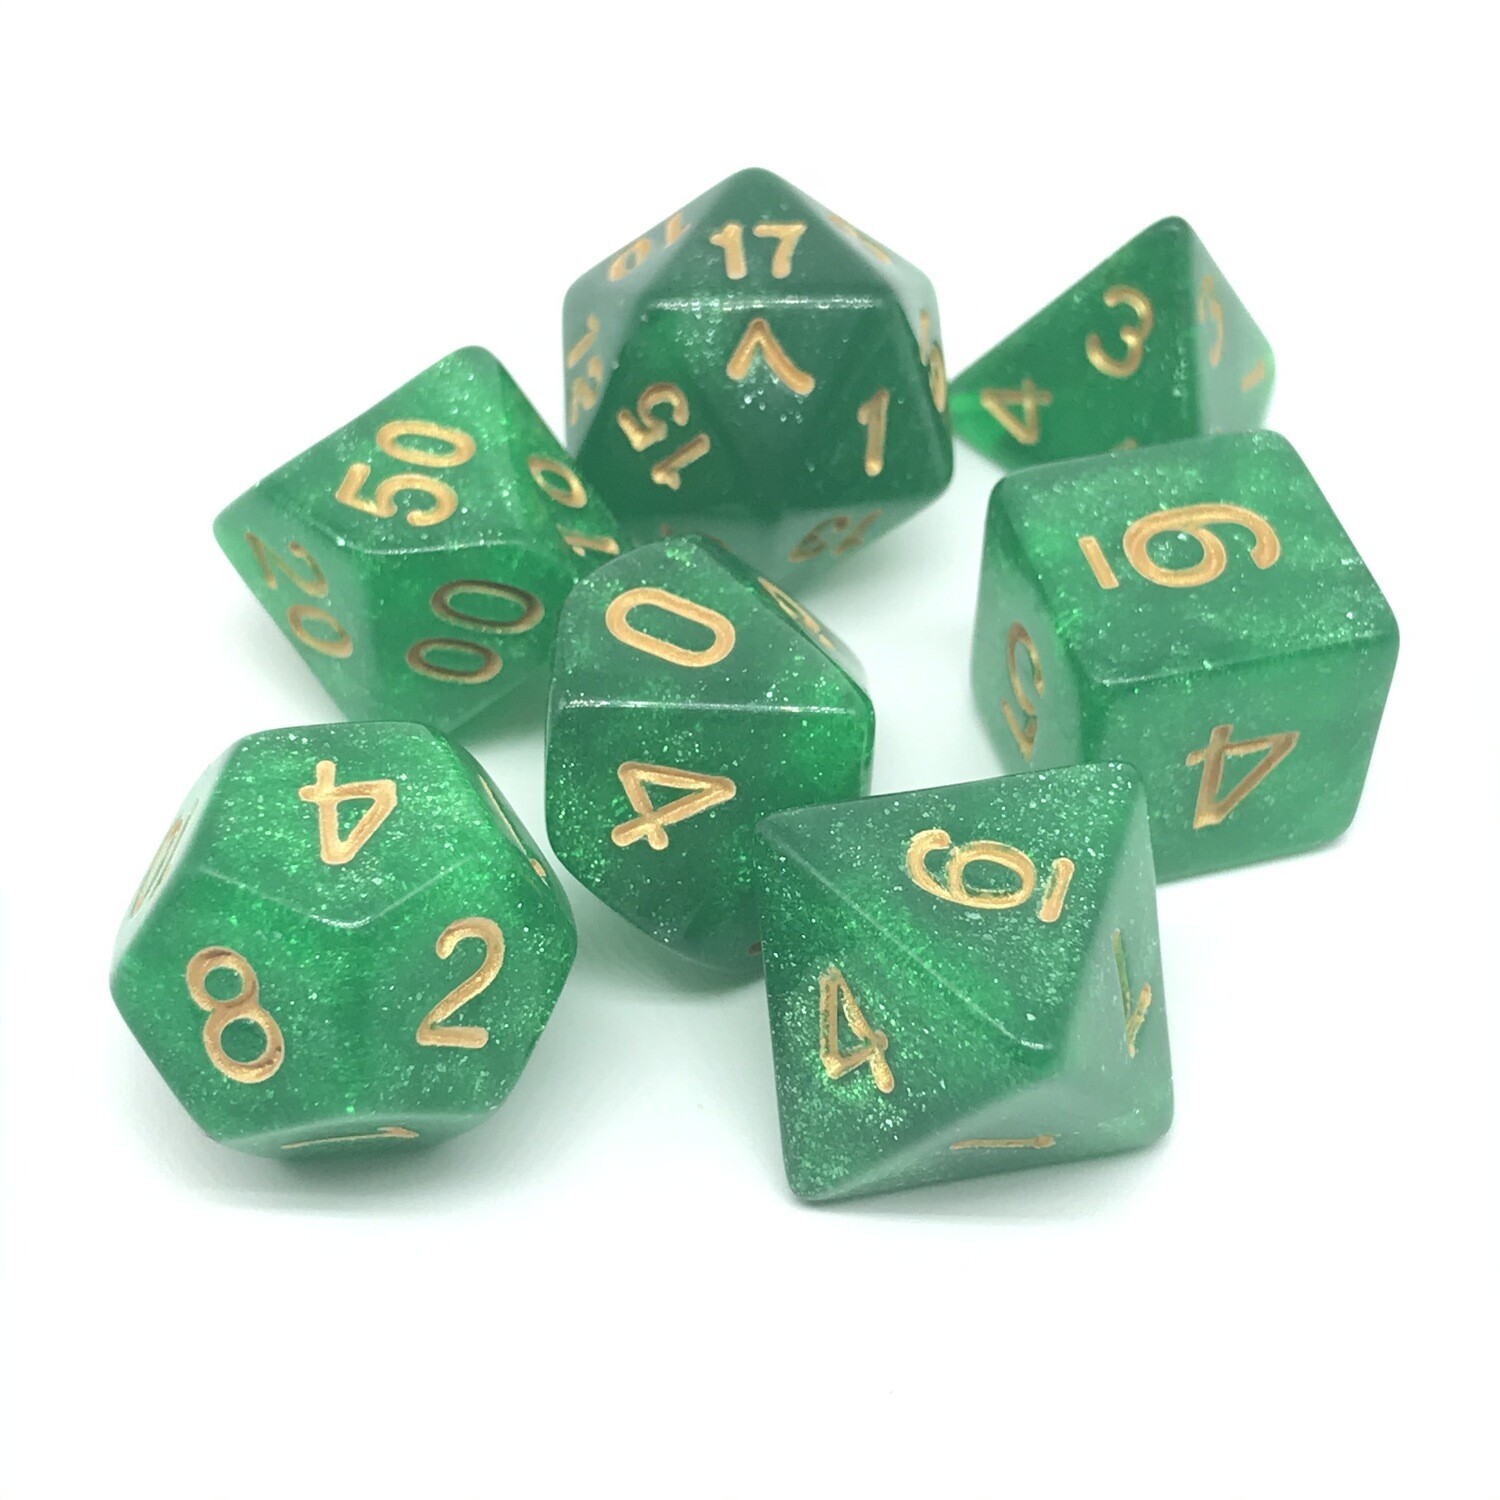 Dice Set - Green sparkly with gold numbers